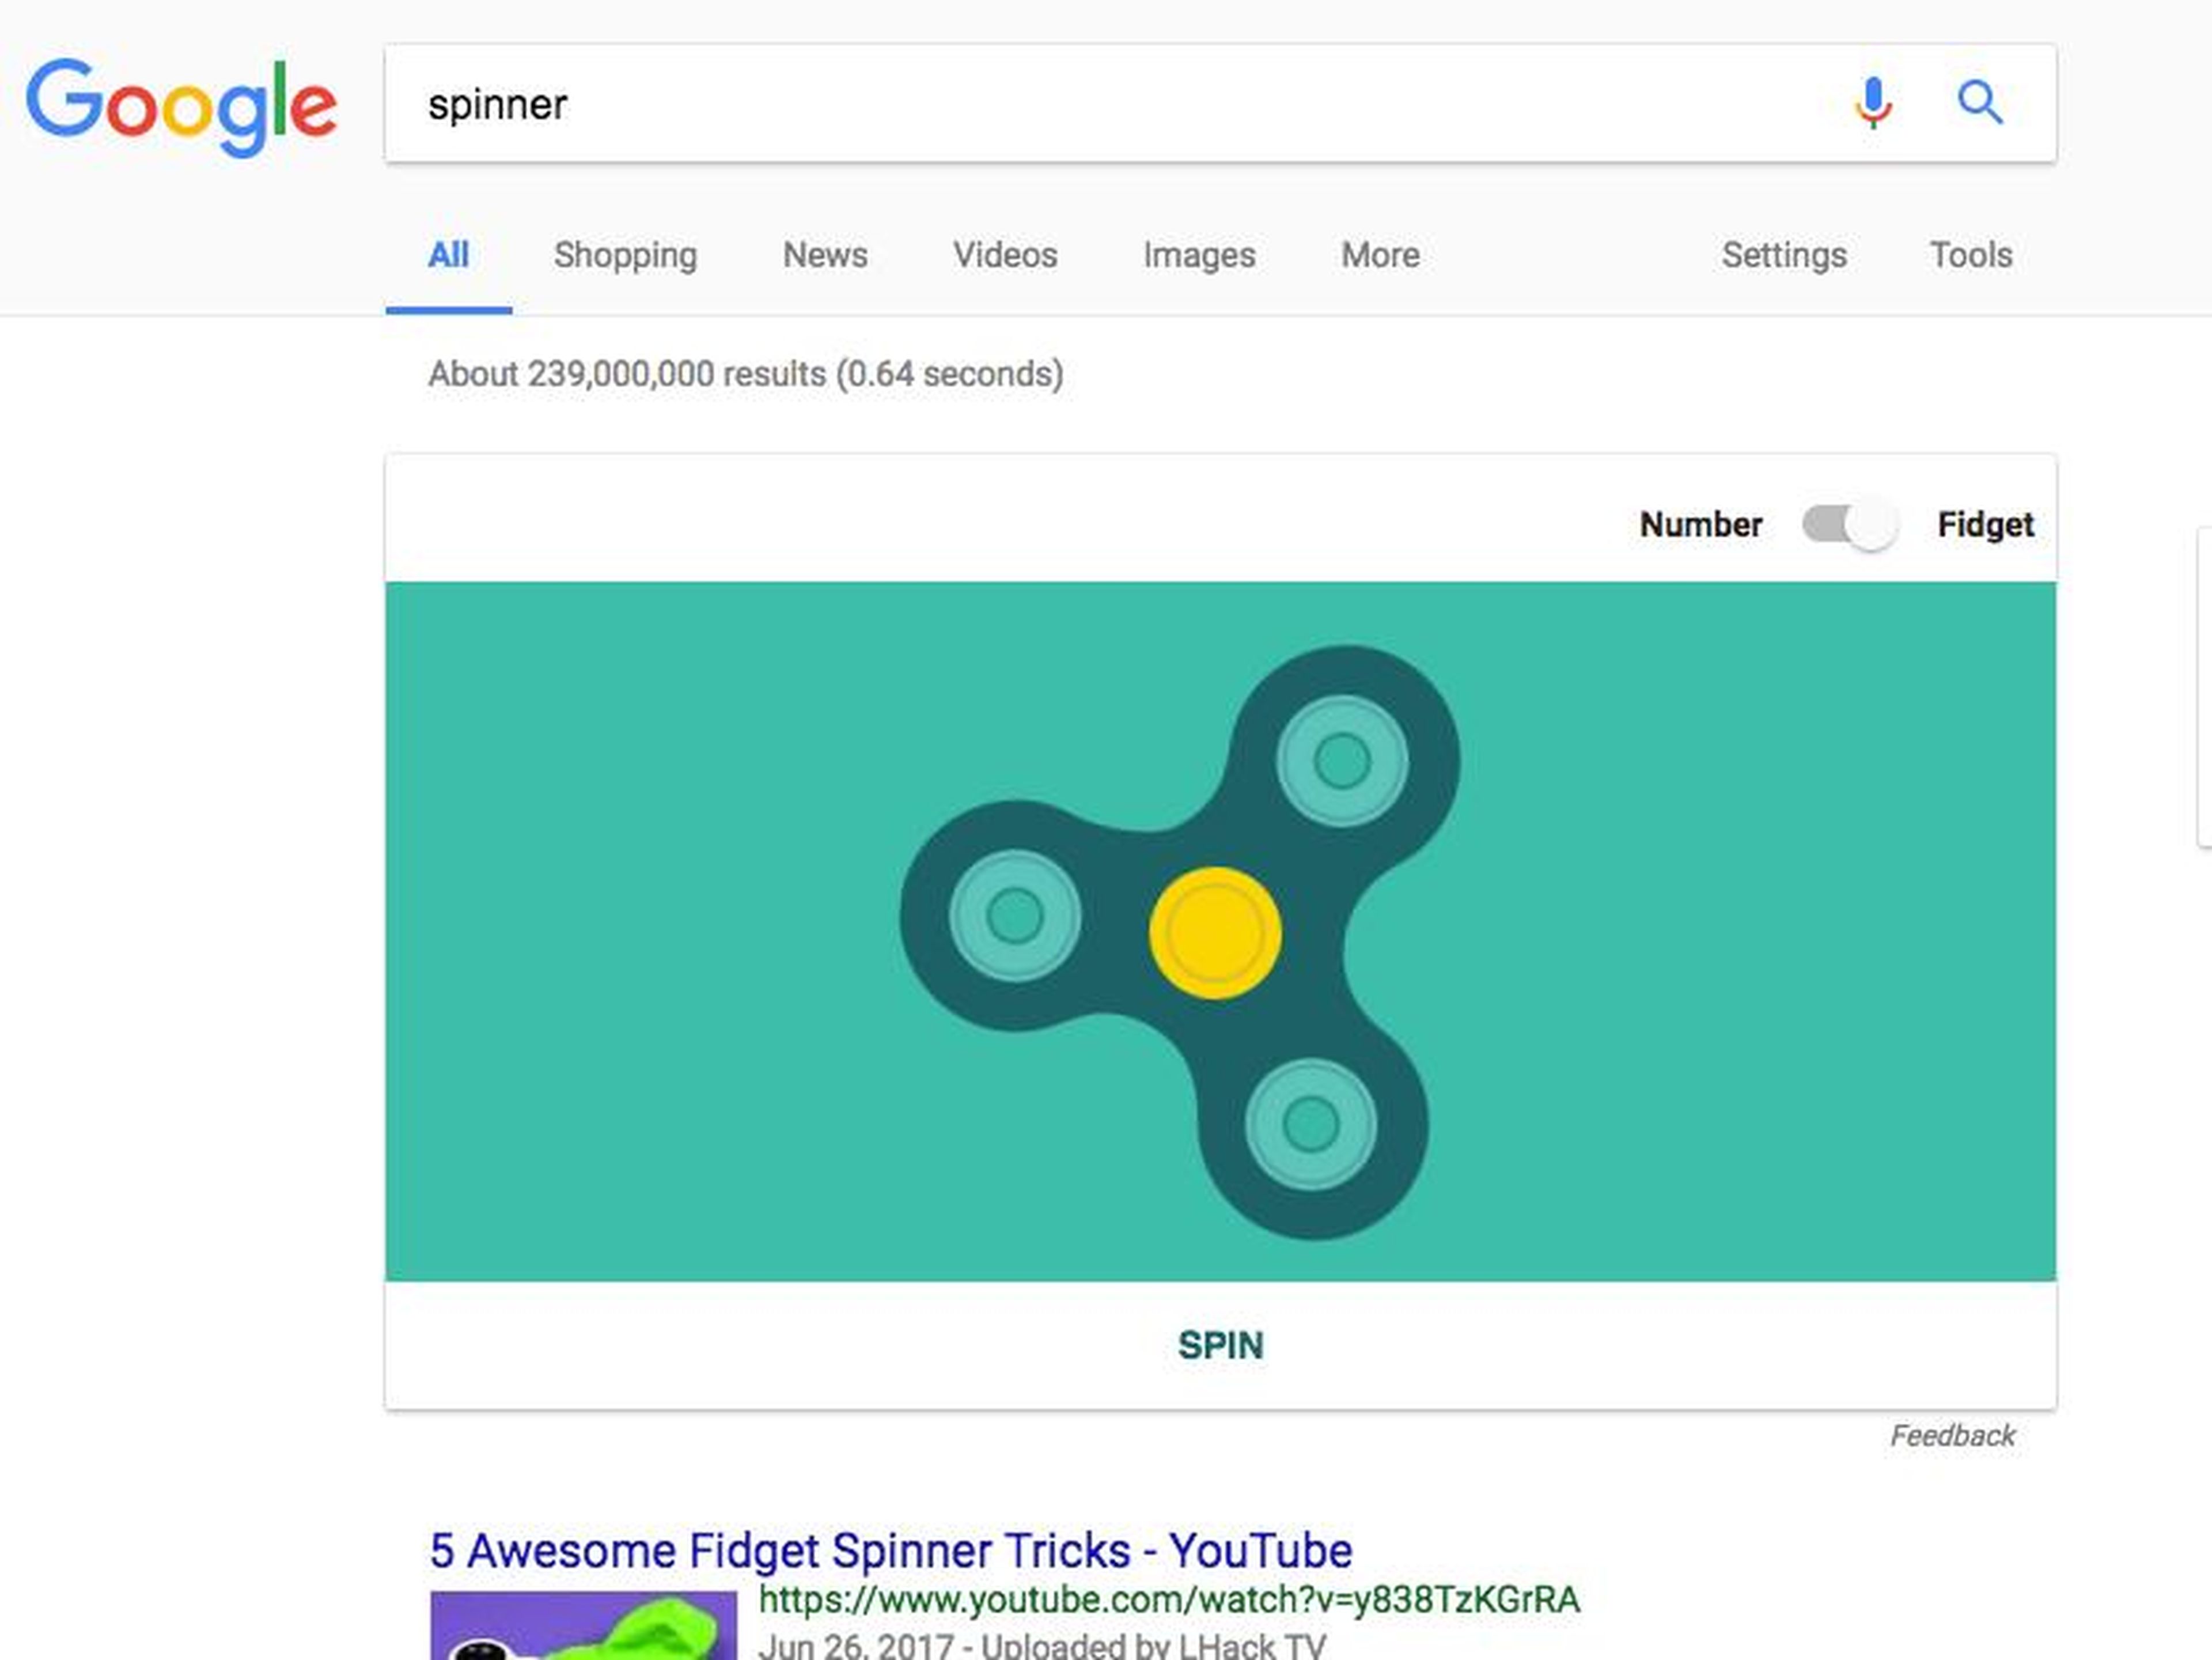 22. If you're still not over the fidget spinner craze of 2017, try searching for "spinner." You can chose between an endlessly spinning fidget spinner or a "Wheel of Fortune"-style number spinner.